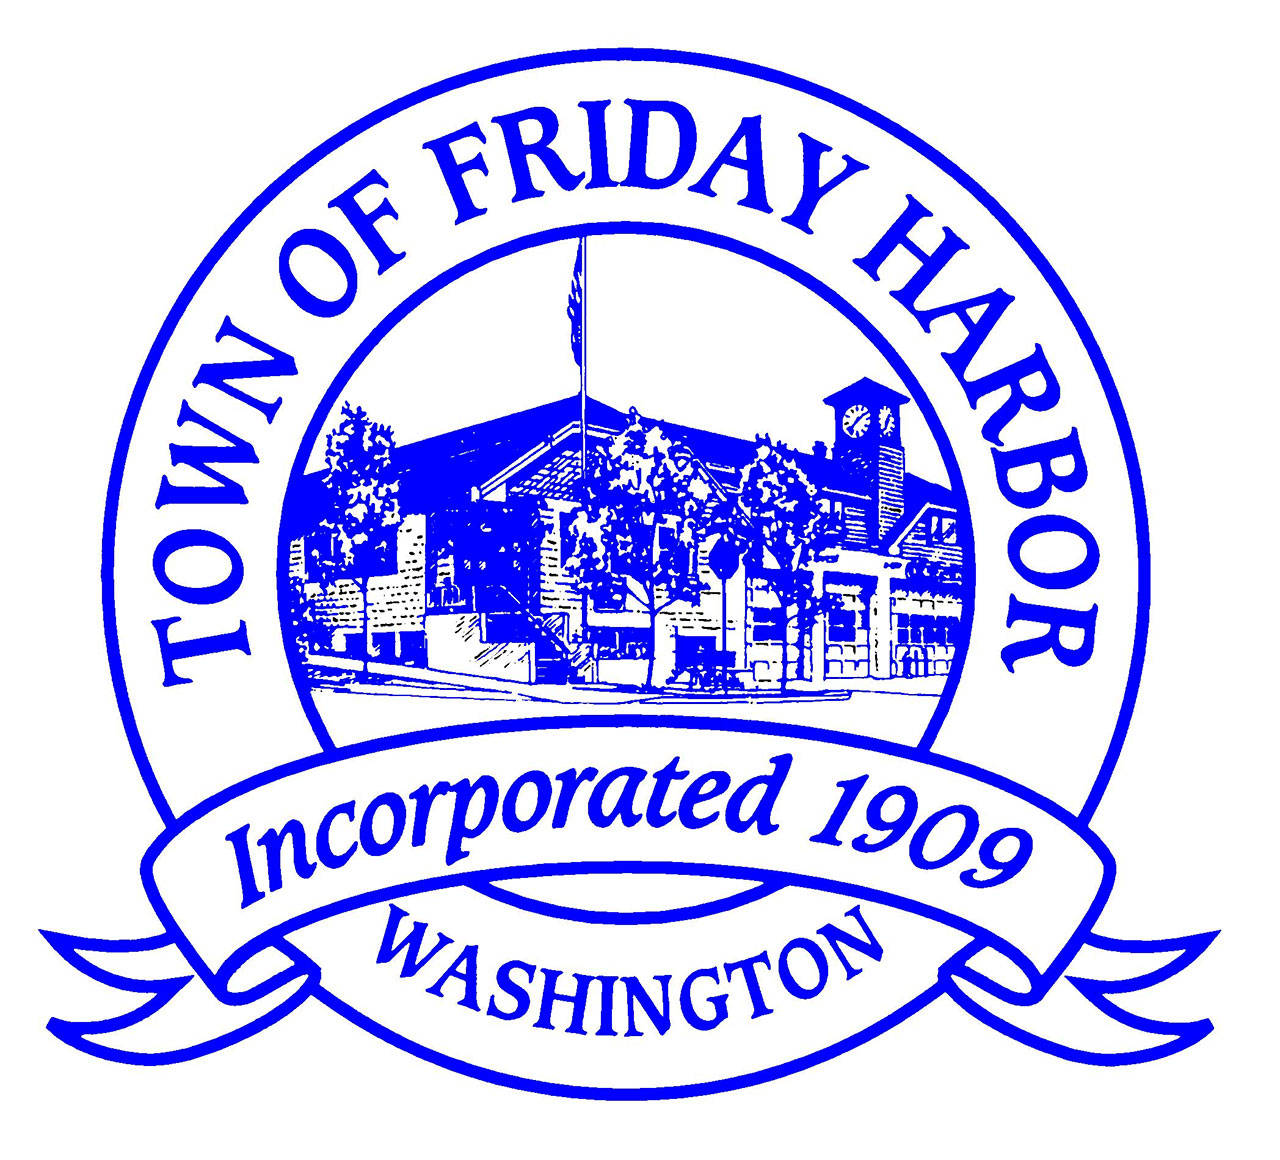 Sewer line testing in Friday Harbor